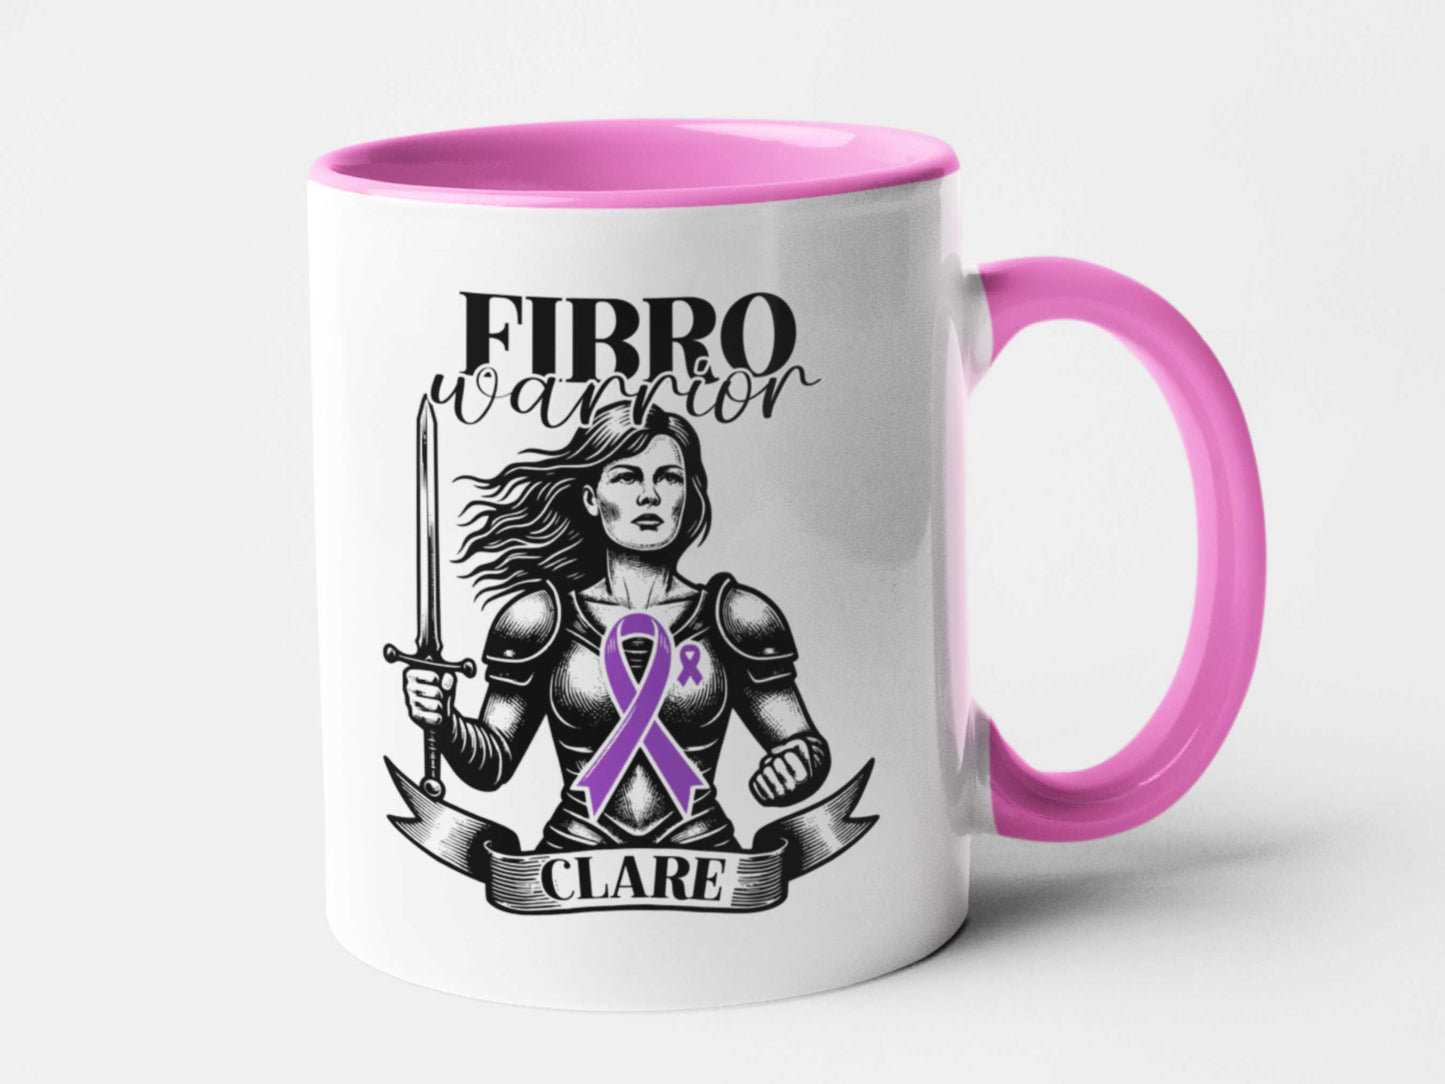 Fibro Warrior Personalised Mug - A Heartfelt Christmas, Mother's Day, Birthday Gift for Mum, Daughter, Sister, Nan, Auntie & Friends, Celebrating Strength and Awareness